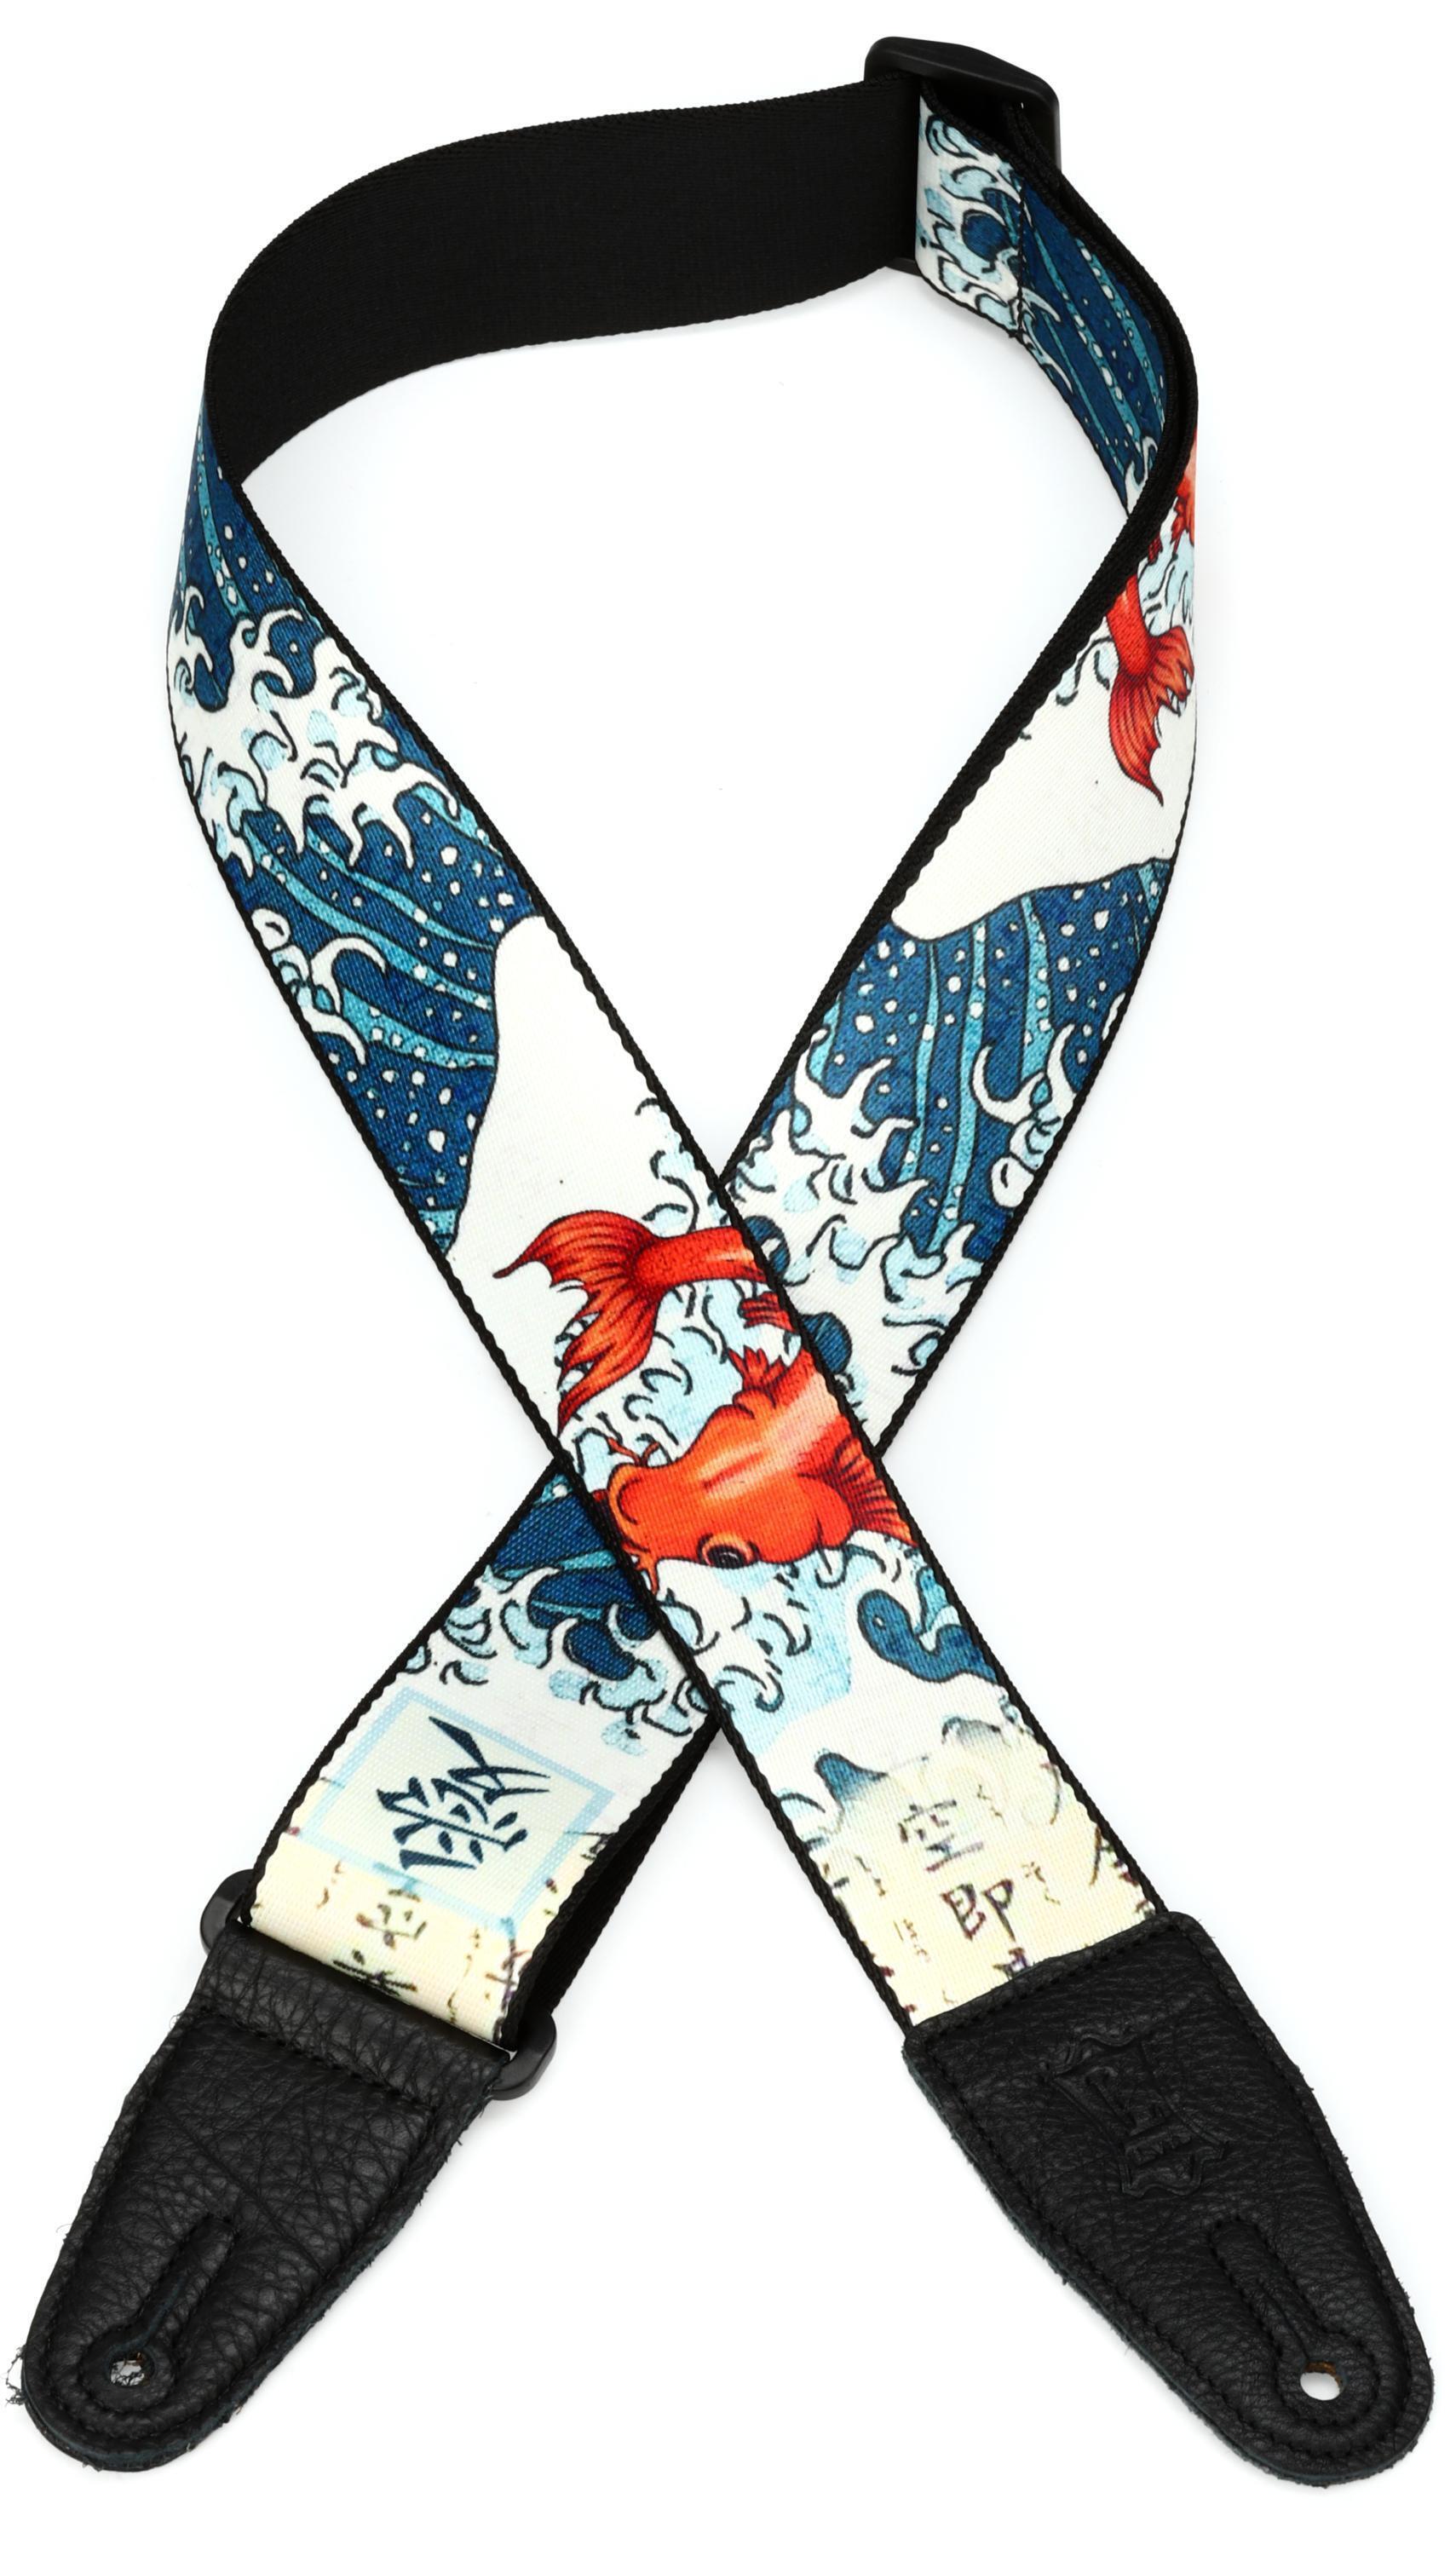 Levy's MPD2 Polyester Guitar Strap - Koi Fish